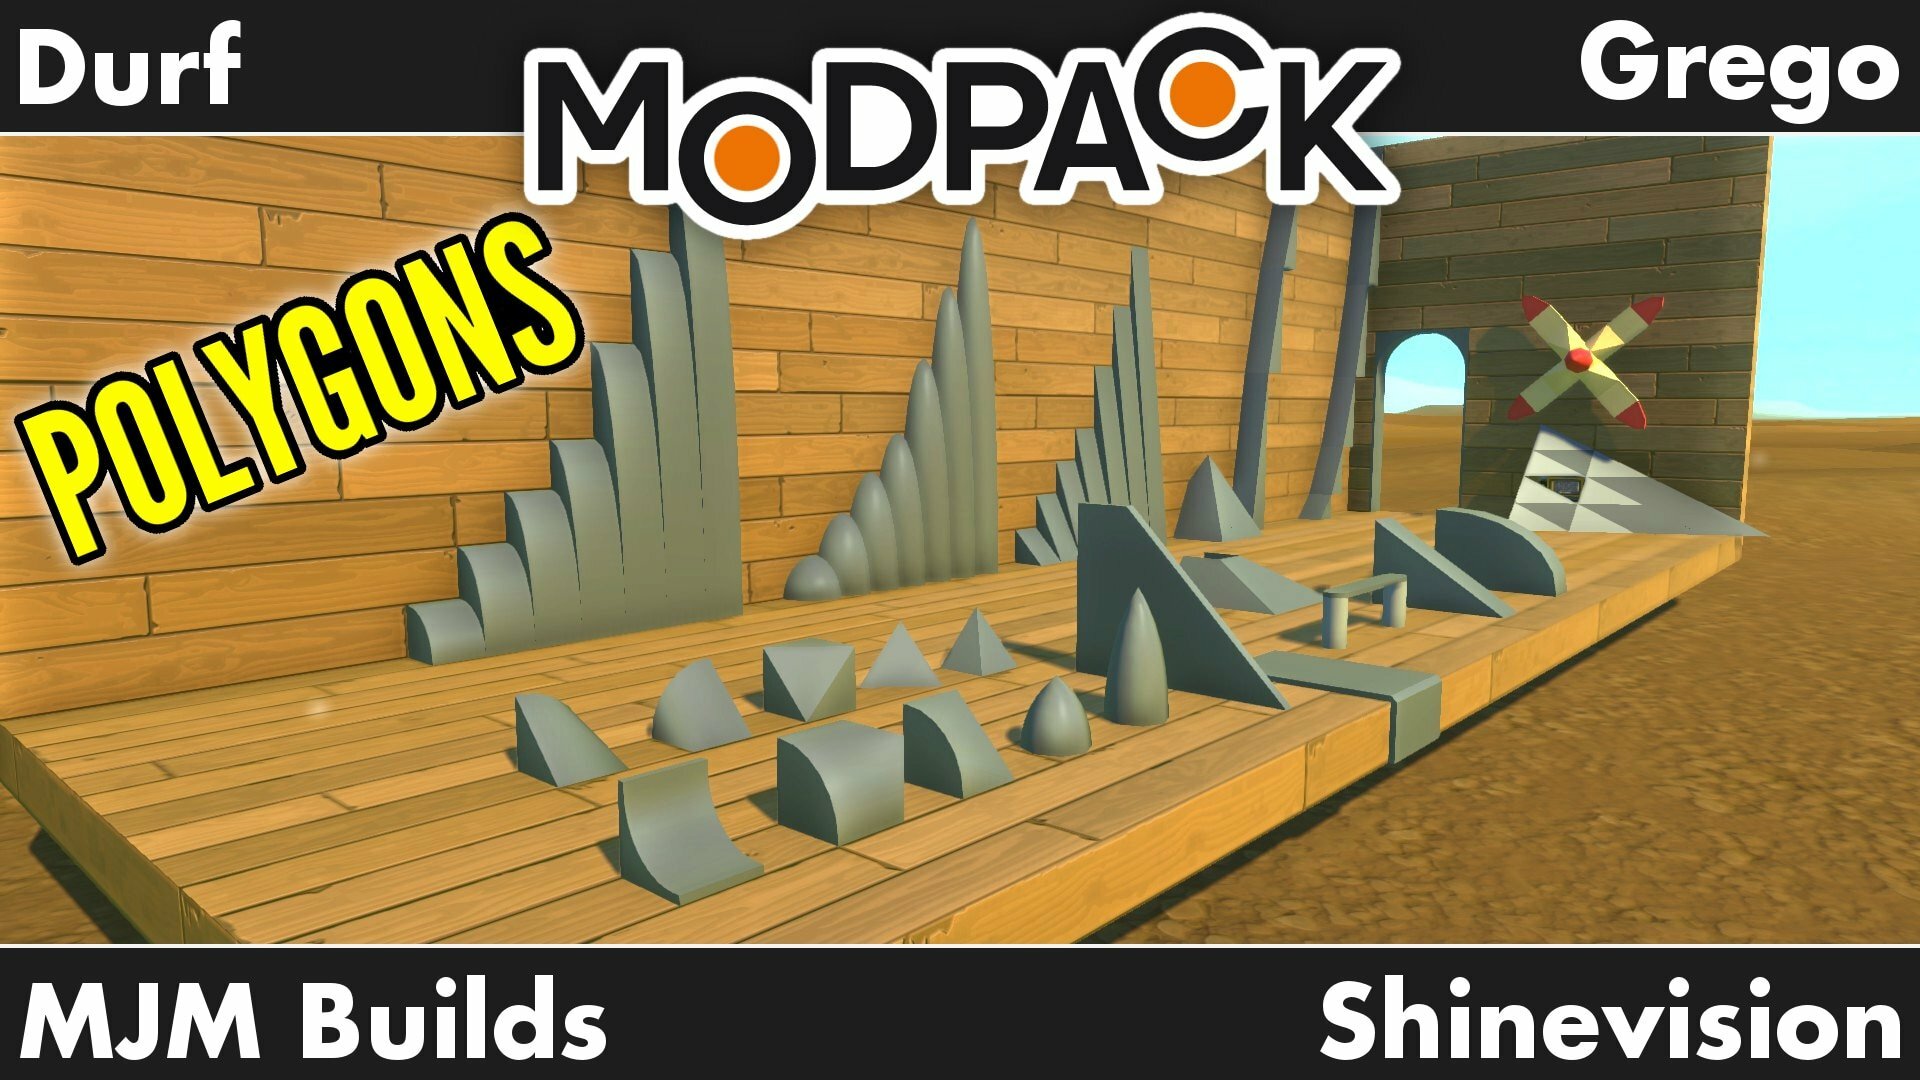 The Modpack Polygons